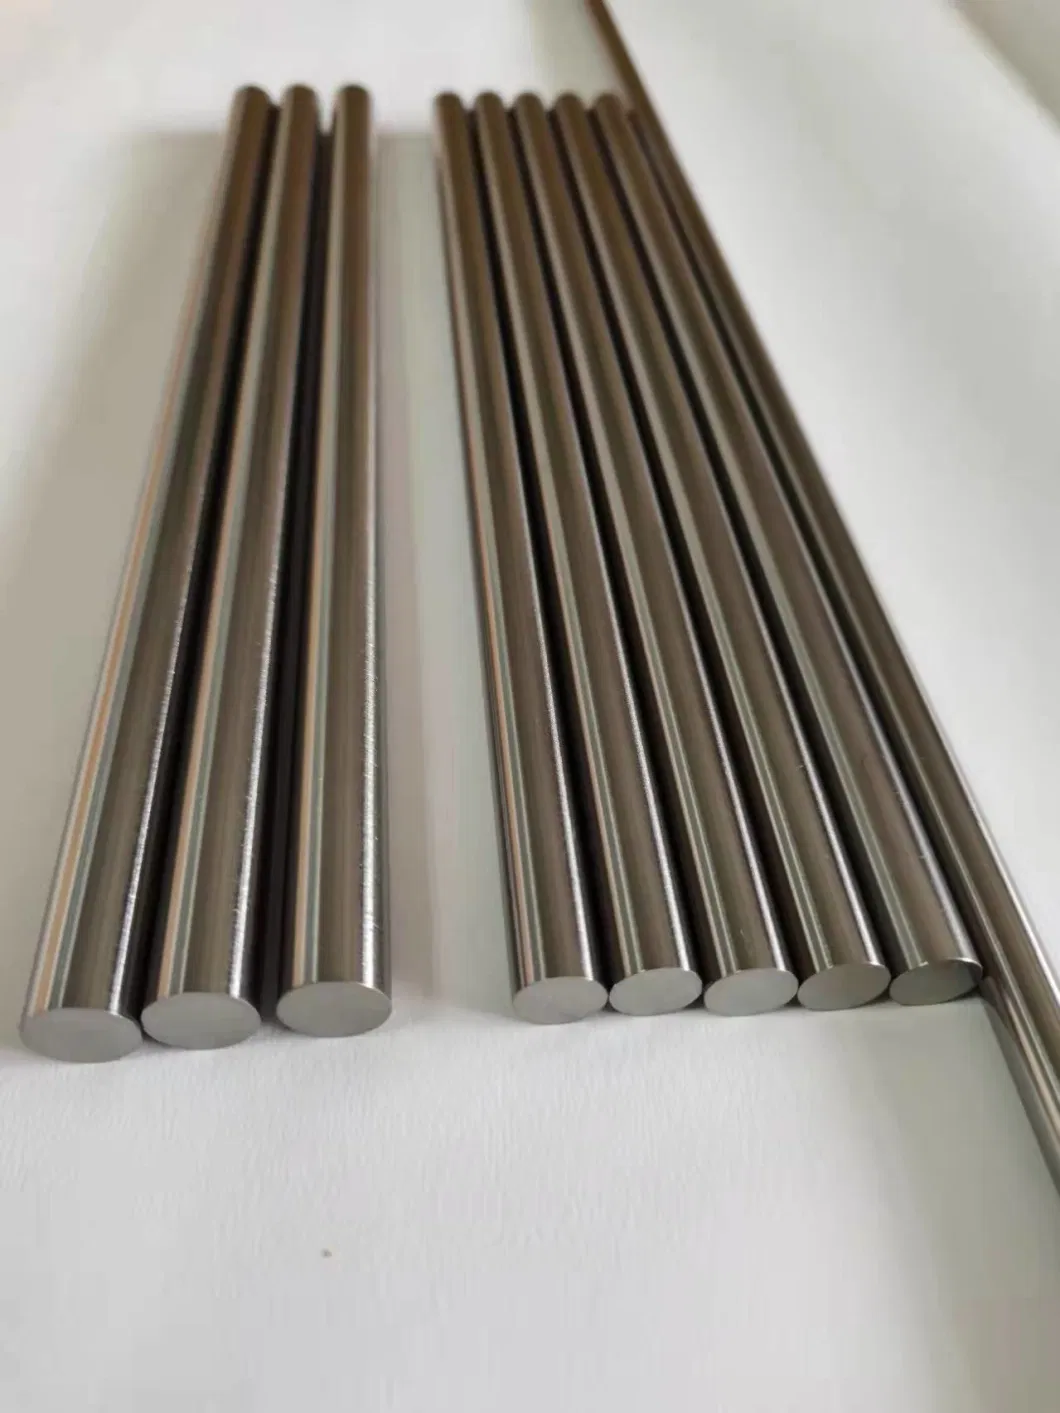 Polished Molybdenum Rods Mola High Temperature Molybdenum Tzm Alloy Rods, Polished Tungsten Alloy W80cu20 Bars/Rods &amp; 99.95%W Pure Black Tungsten Rods